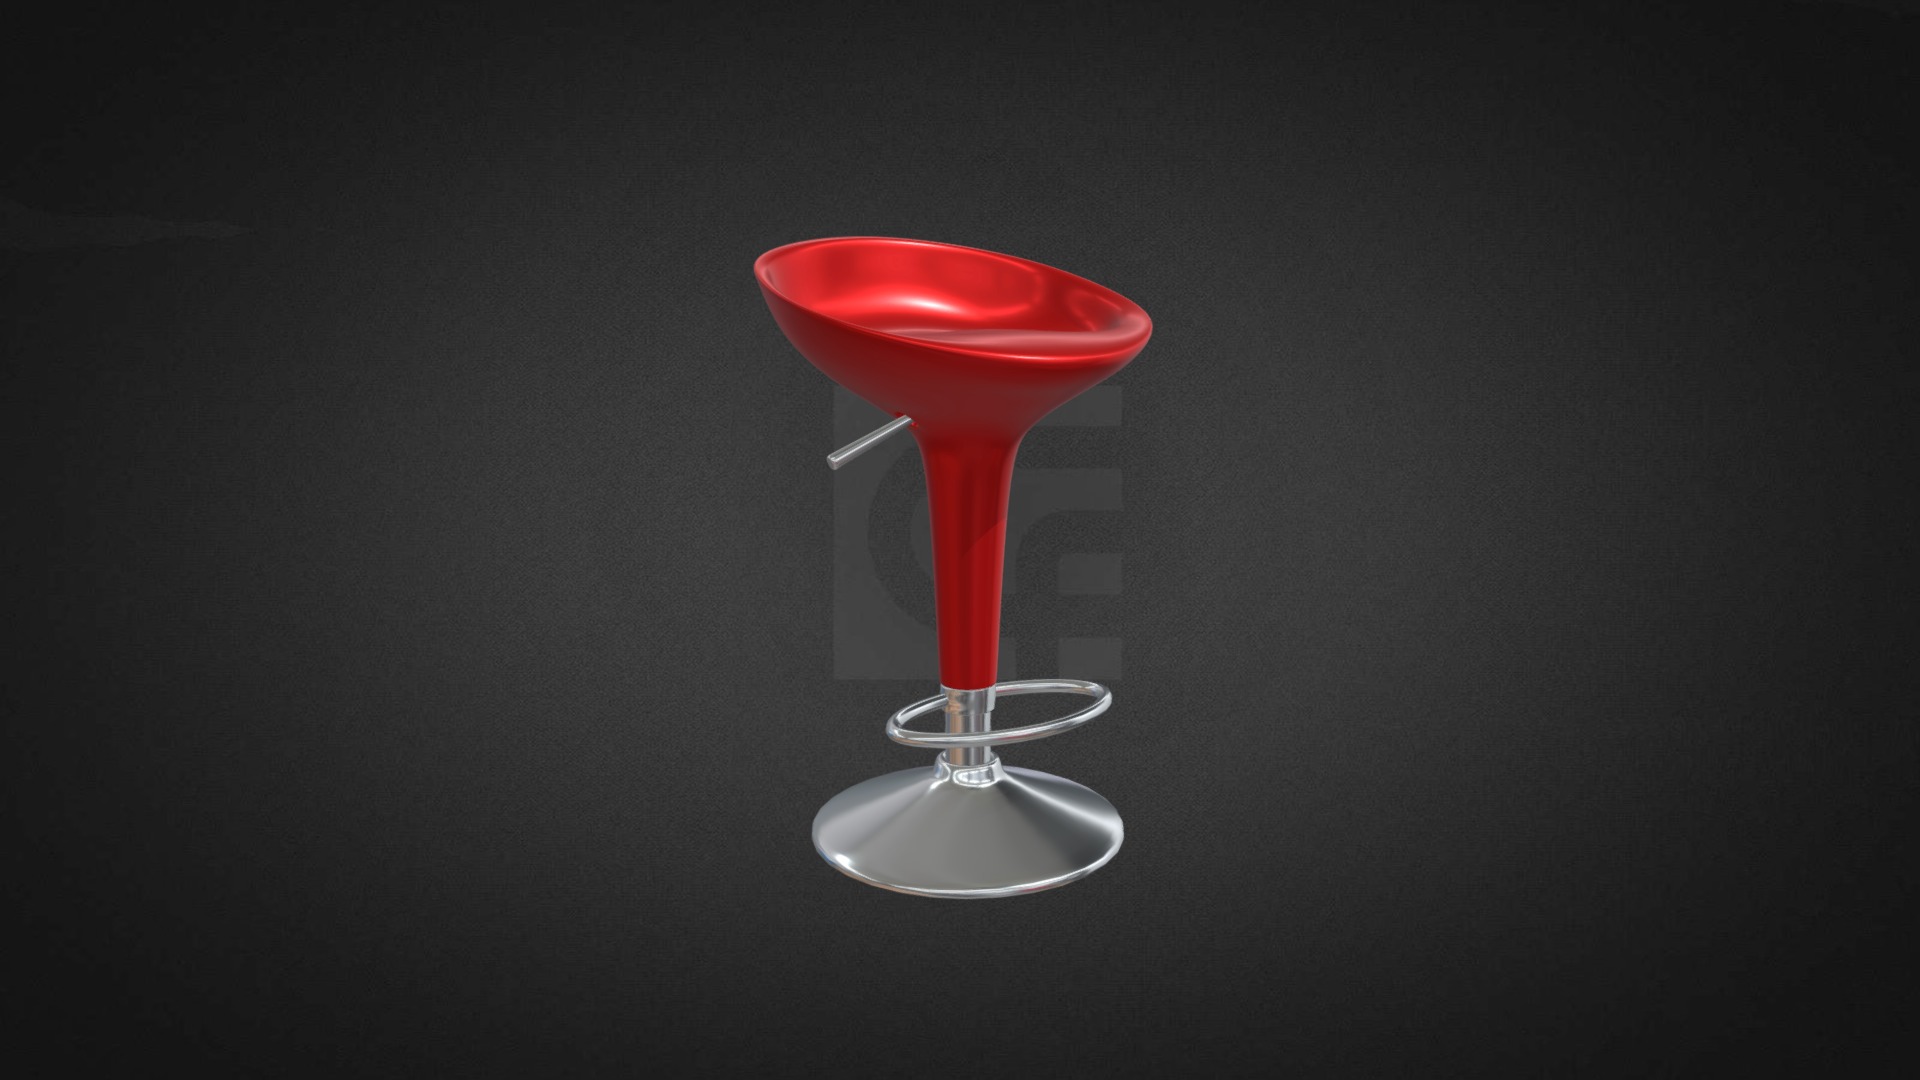 3D model Saturn Stool Hire - This is a 3D model of the Saturn Stool Hire. The 3D model is about a red and white glass.